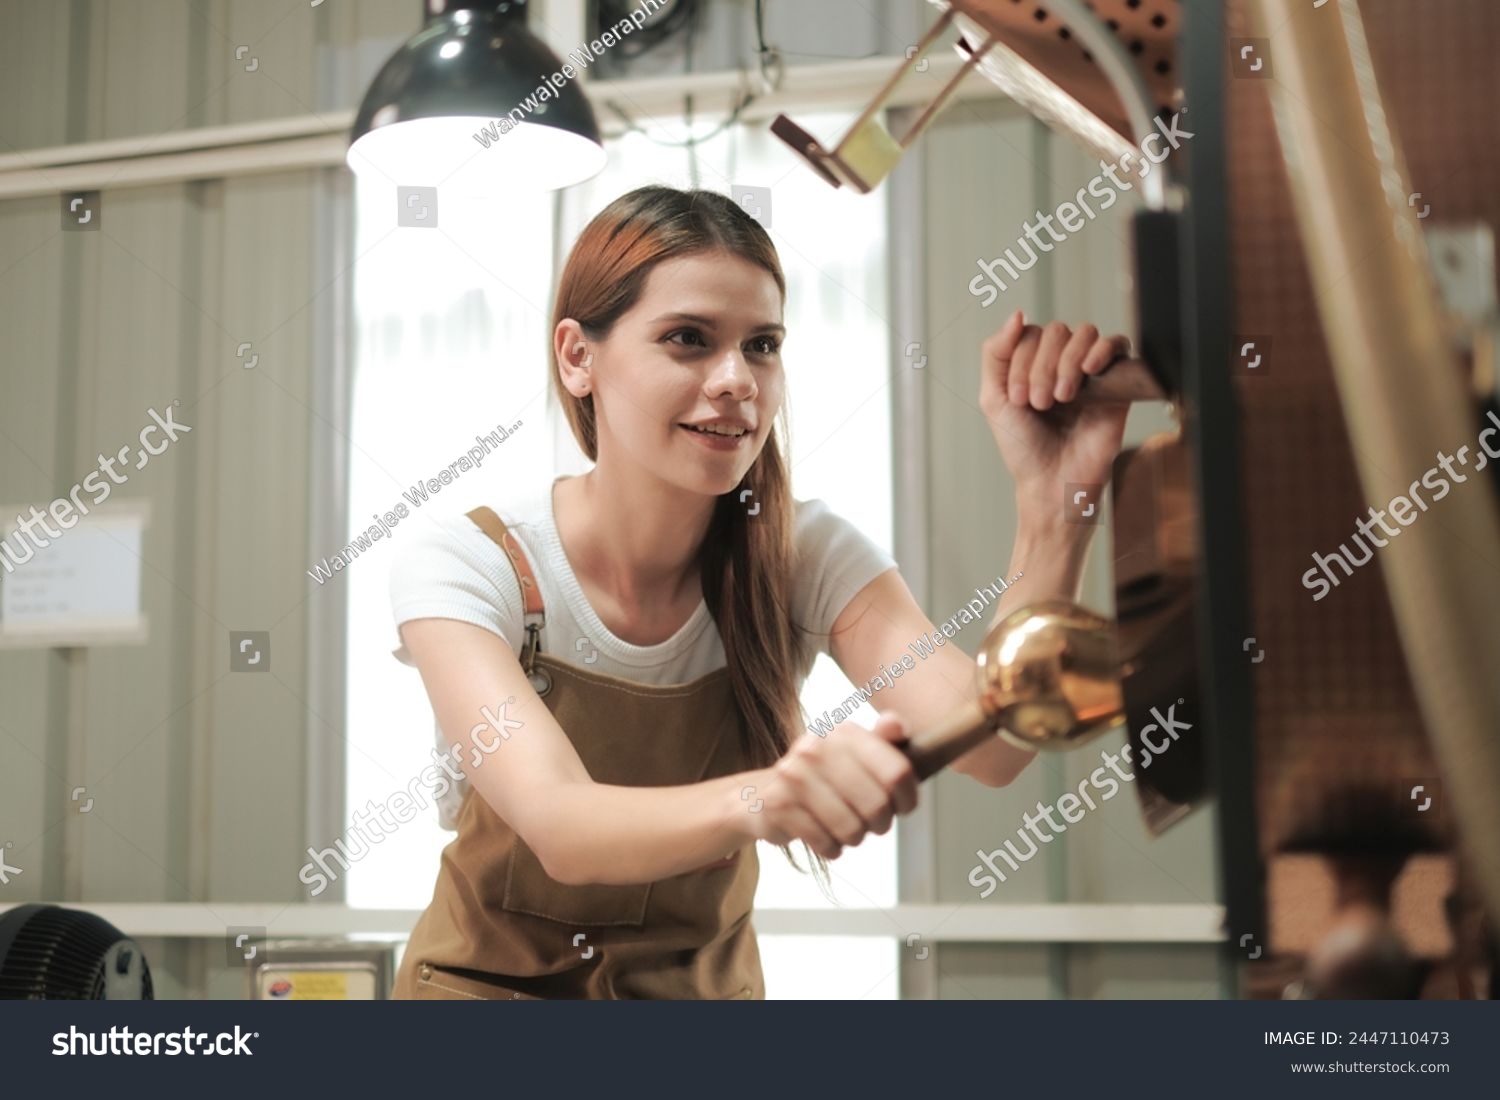 White woman craftsperson using roasted coffee beans machine with smile of happiness, Woman work in roasted coffee beans manufactory. #2447110473